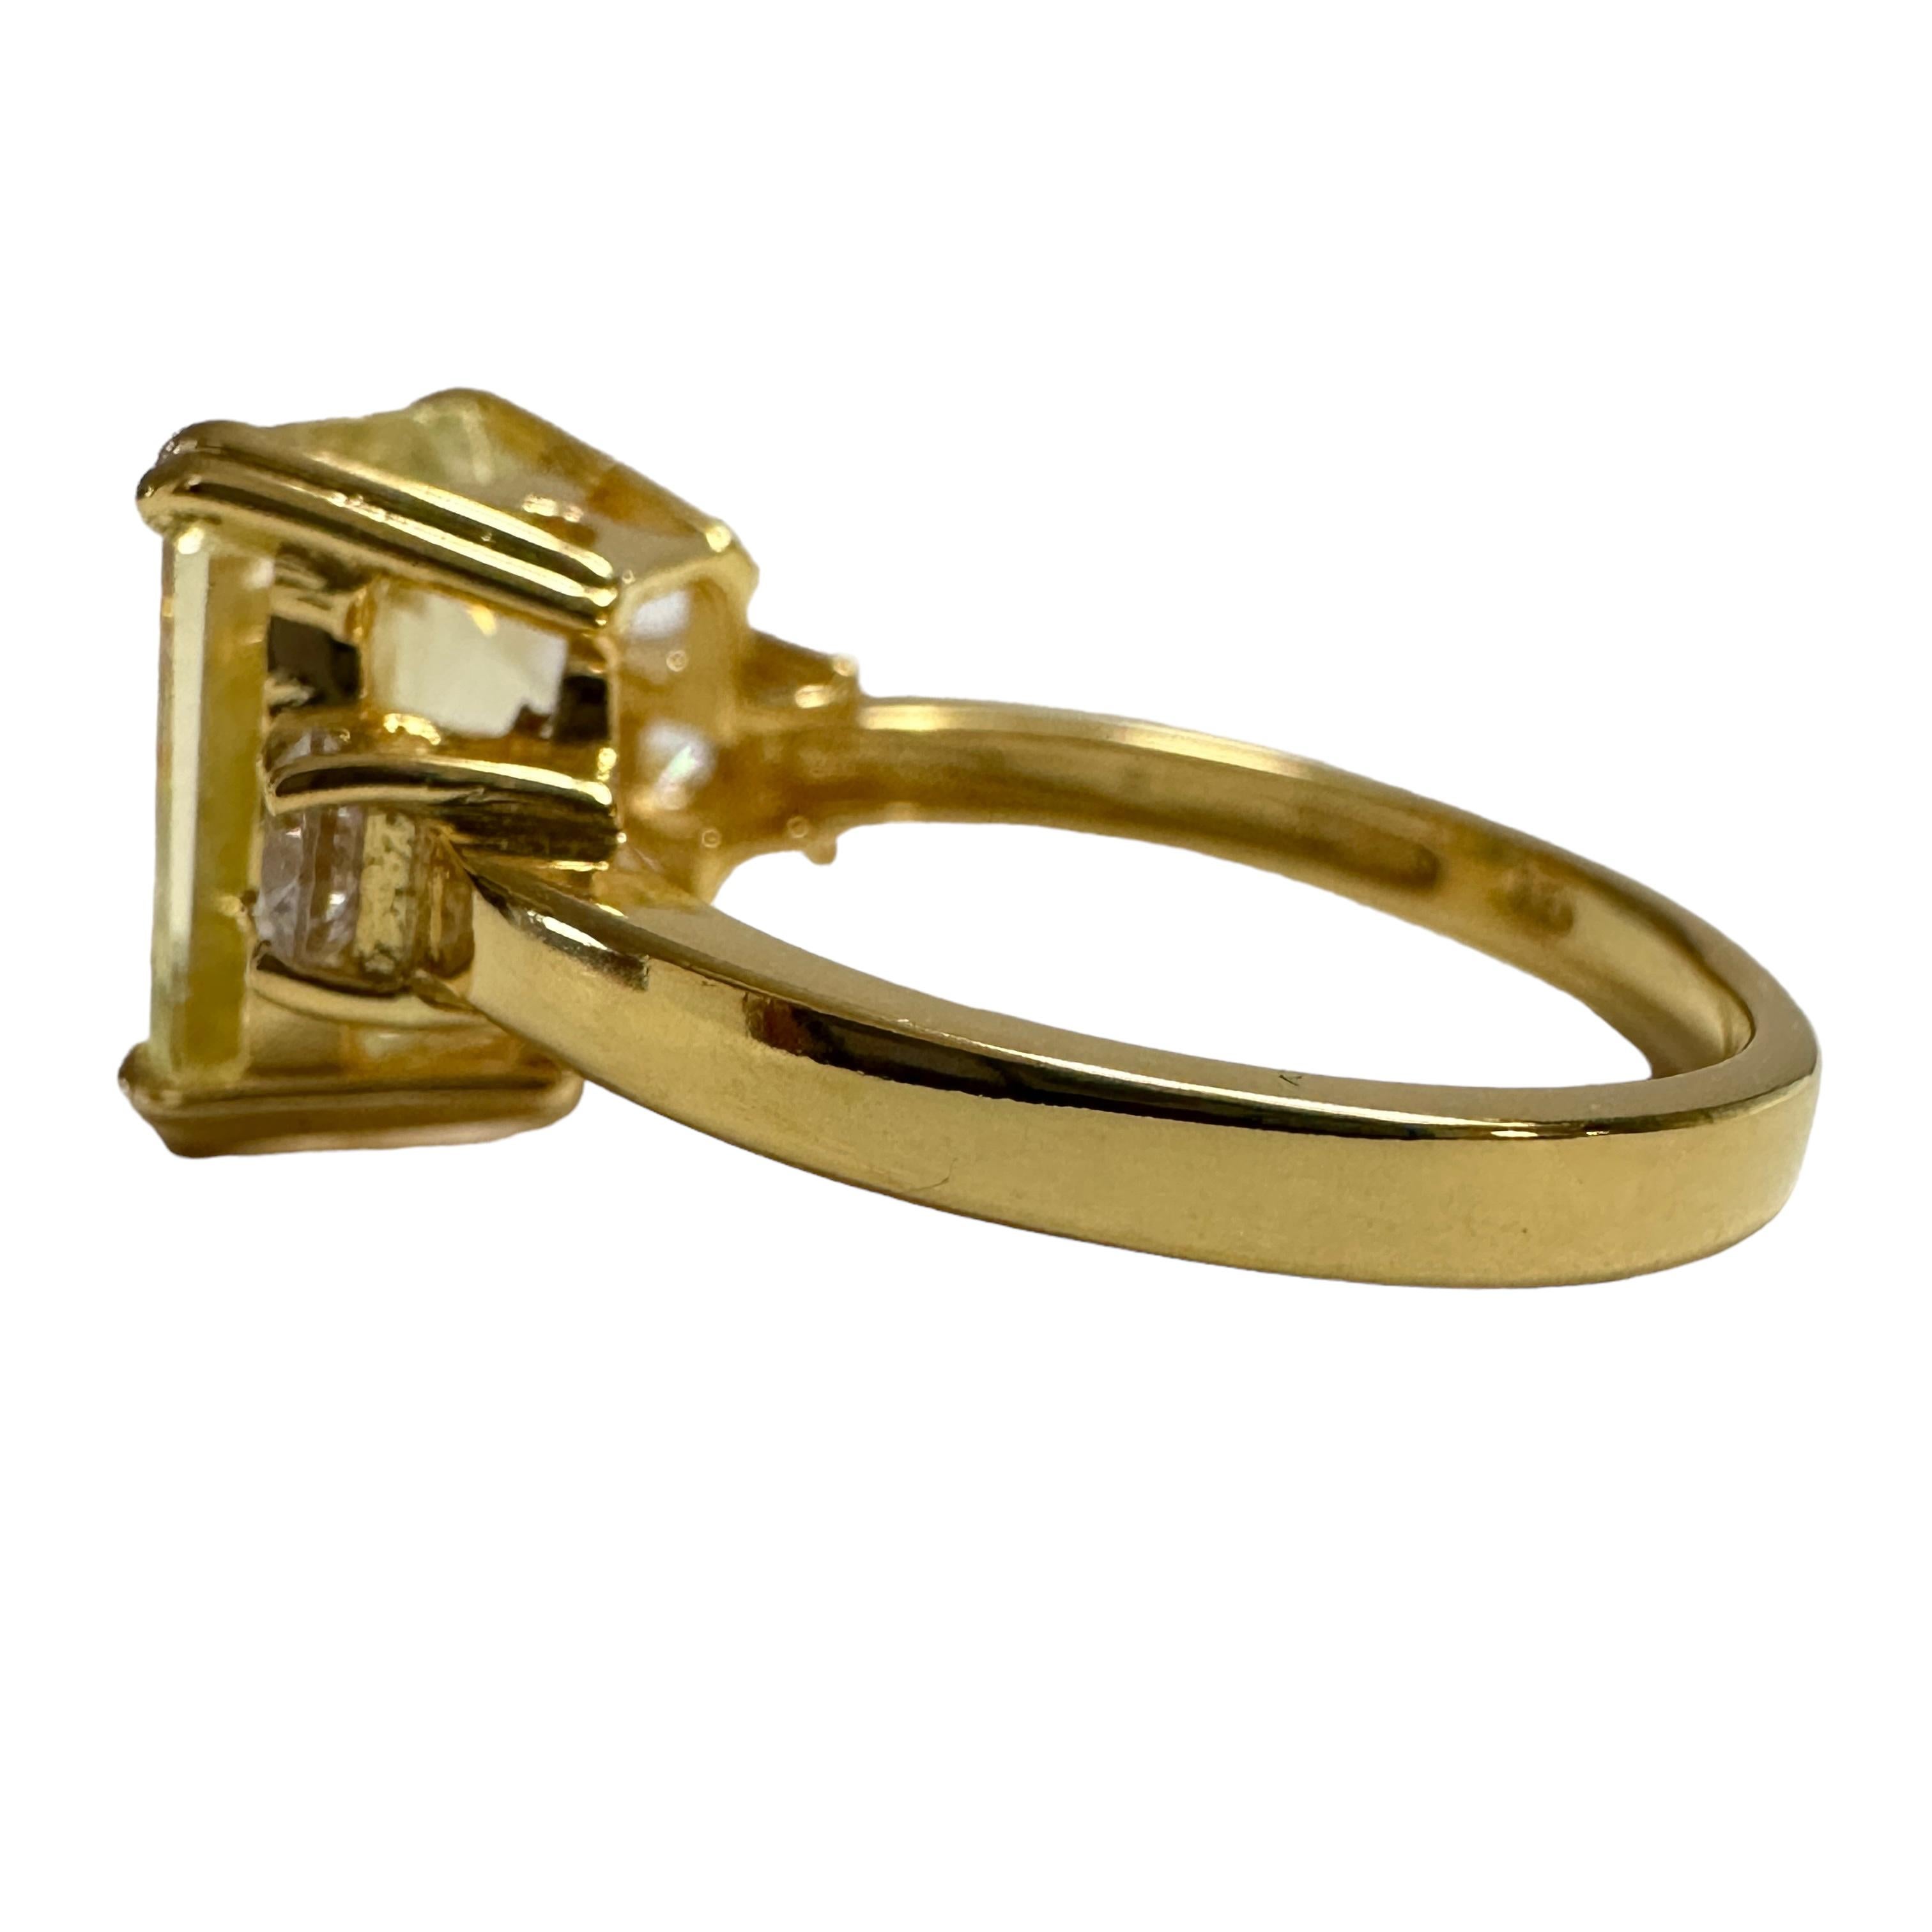 This stone was mined in the Africa. The setting is beautiful yellow gold plating which really compliments the stone.  The ring is a size 6.   It is an emerald cut stone and is 11 x 9 mm.  The main stone is flanked by Diamond Cut White Sapphires. 